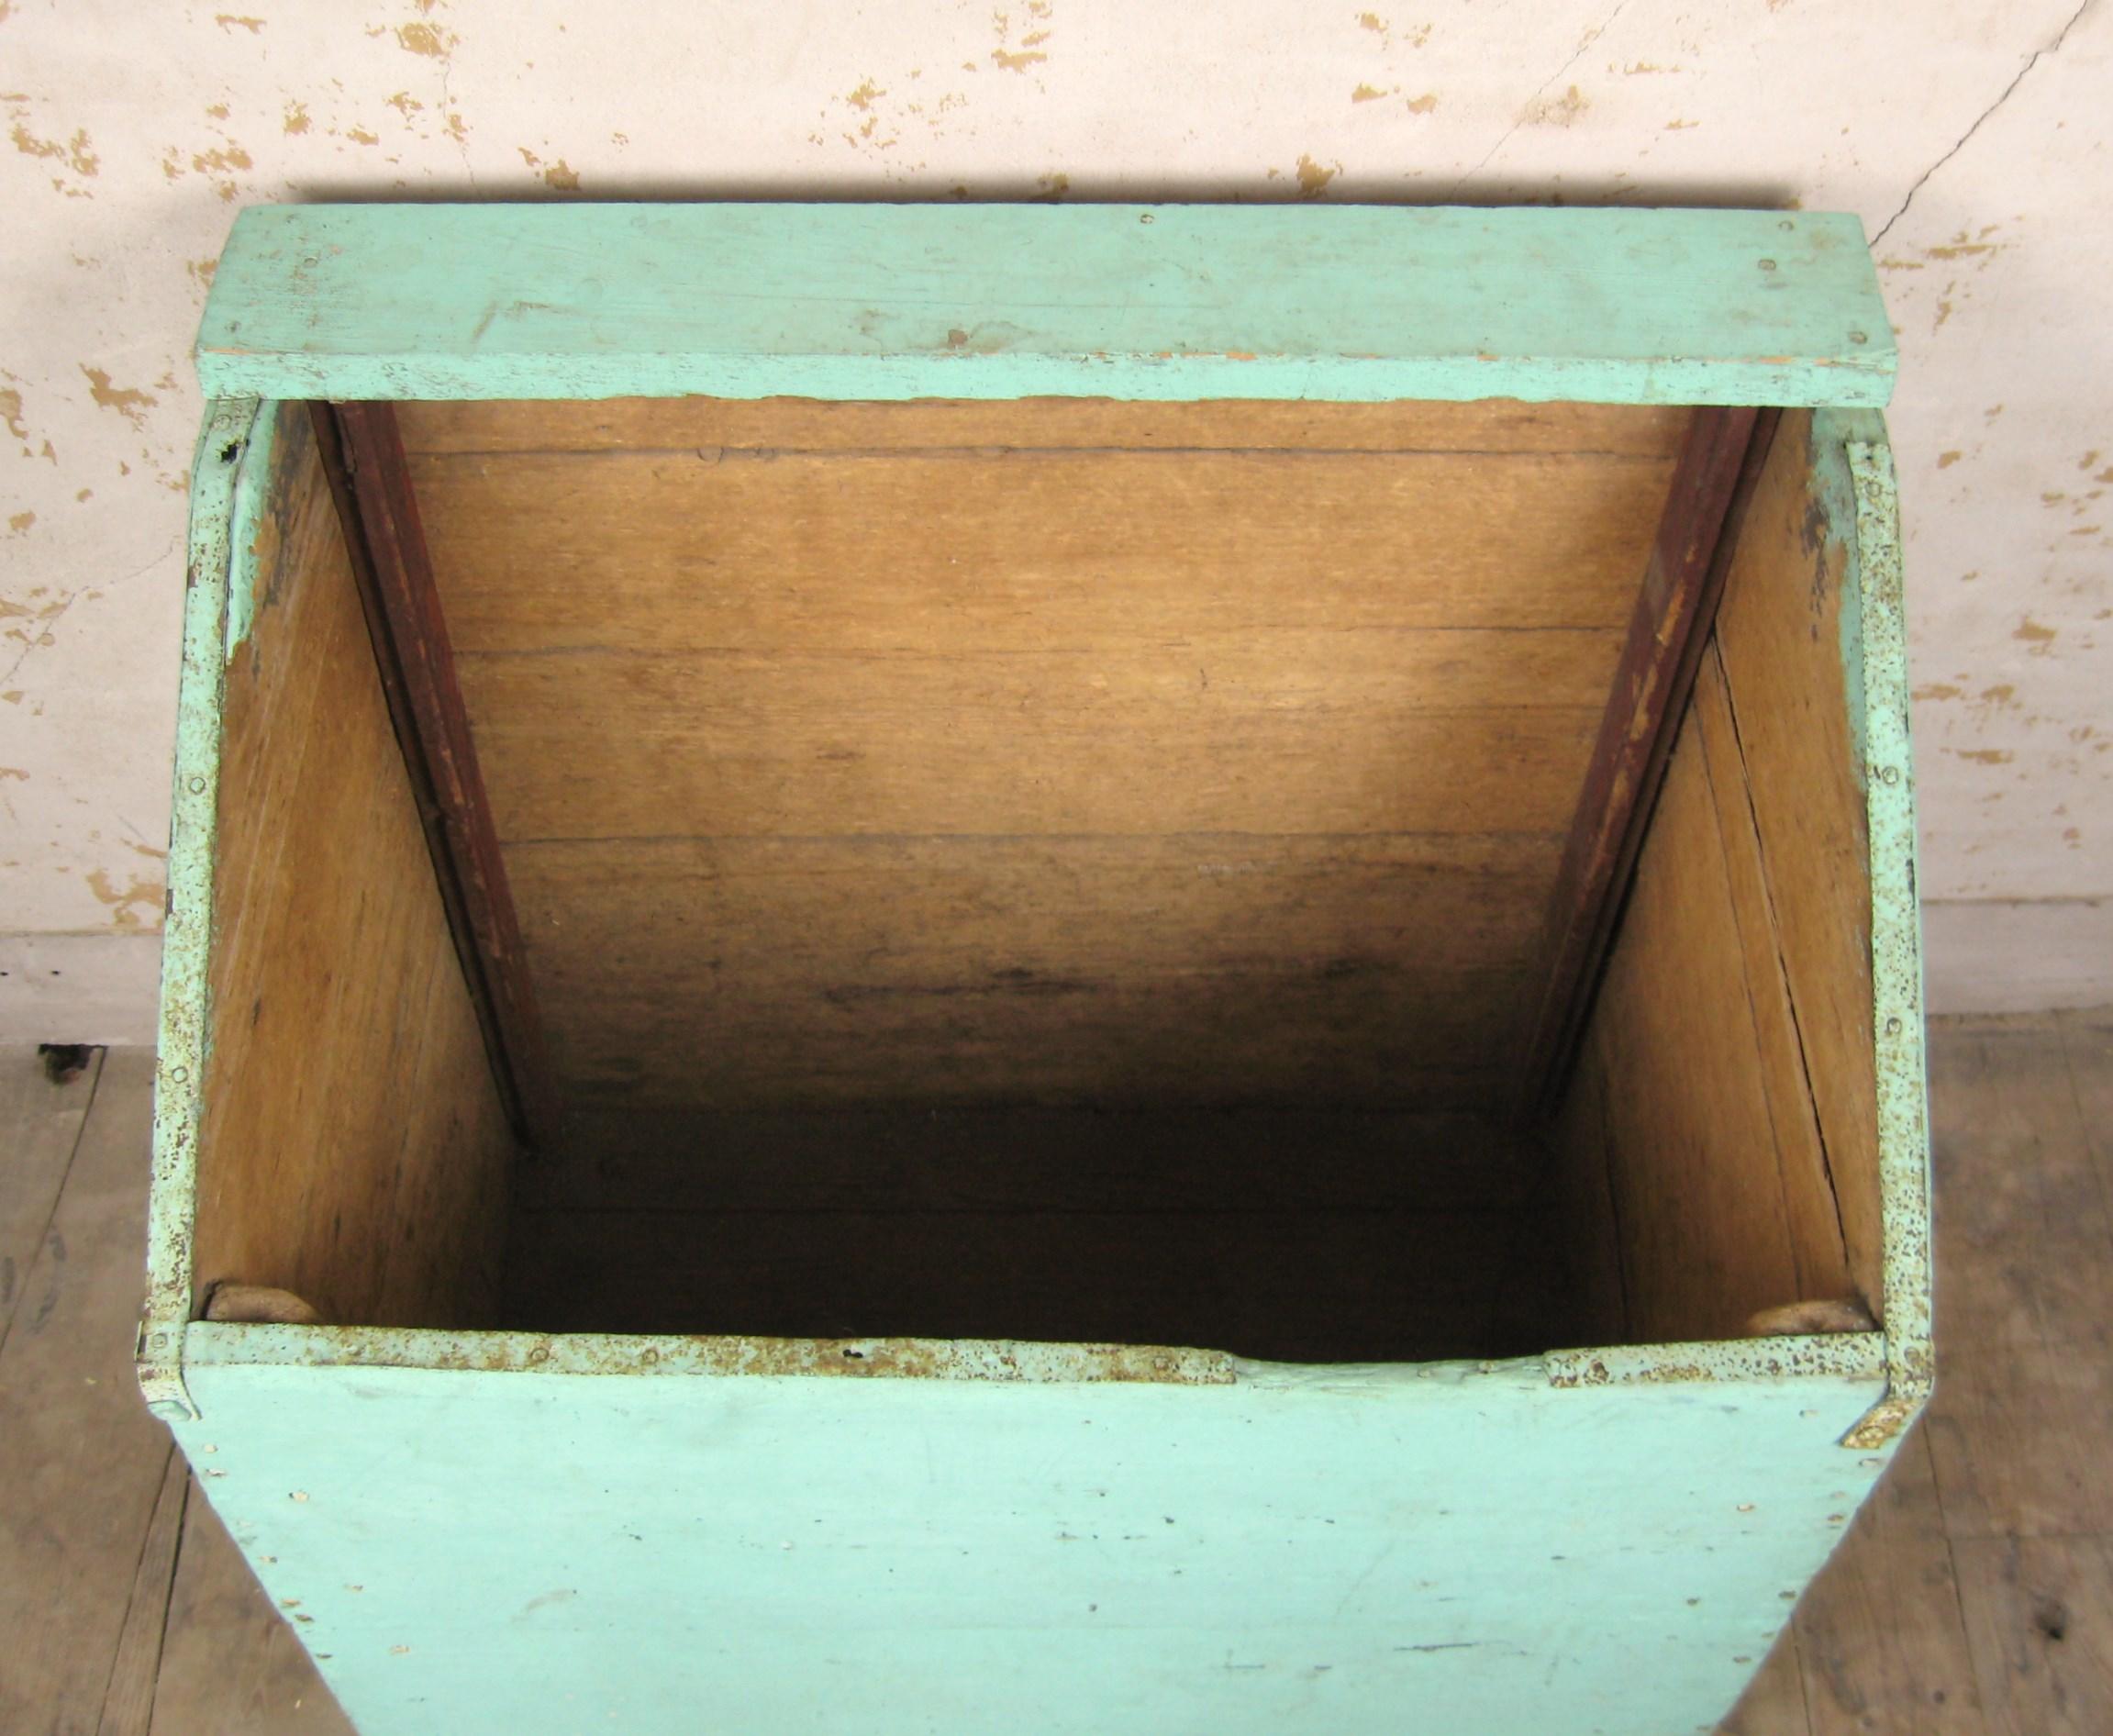 1920s Green wooden box, frequently used for firewood in farm houses. It can be used for many things like recycling box, we used it for many many years as a decorating piece in my 18 century farmhouse. Please look at the photos, it hasn’t been